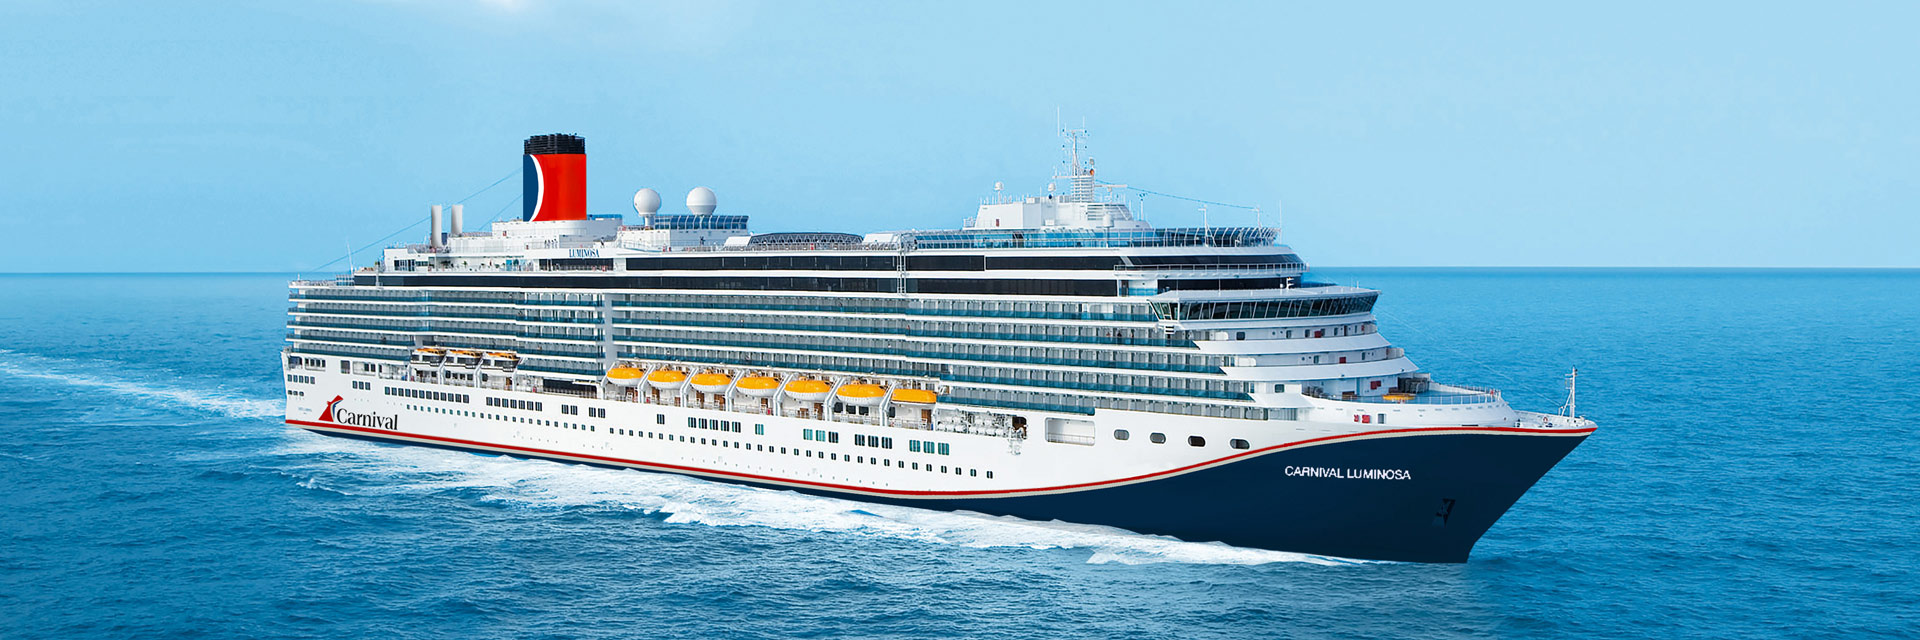 11Day Papua New Guinea Cruise from Brisbane Carnival